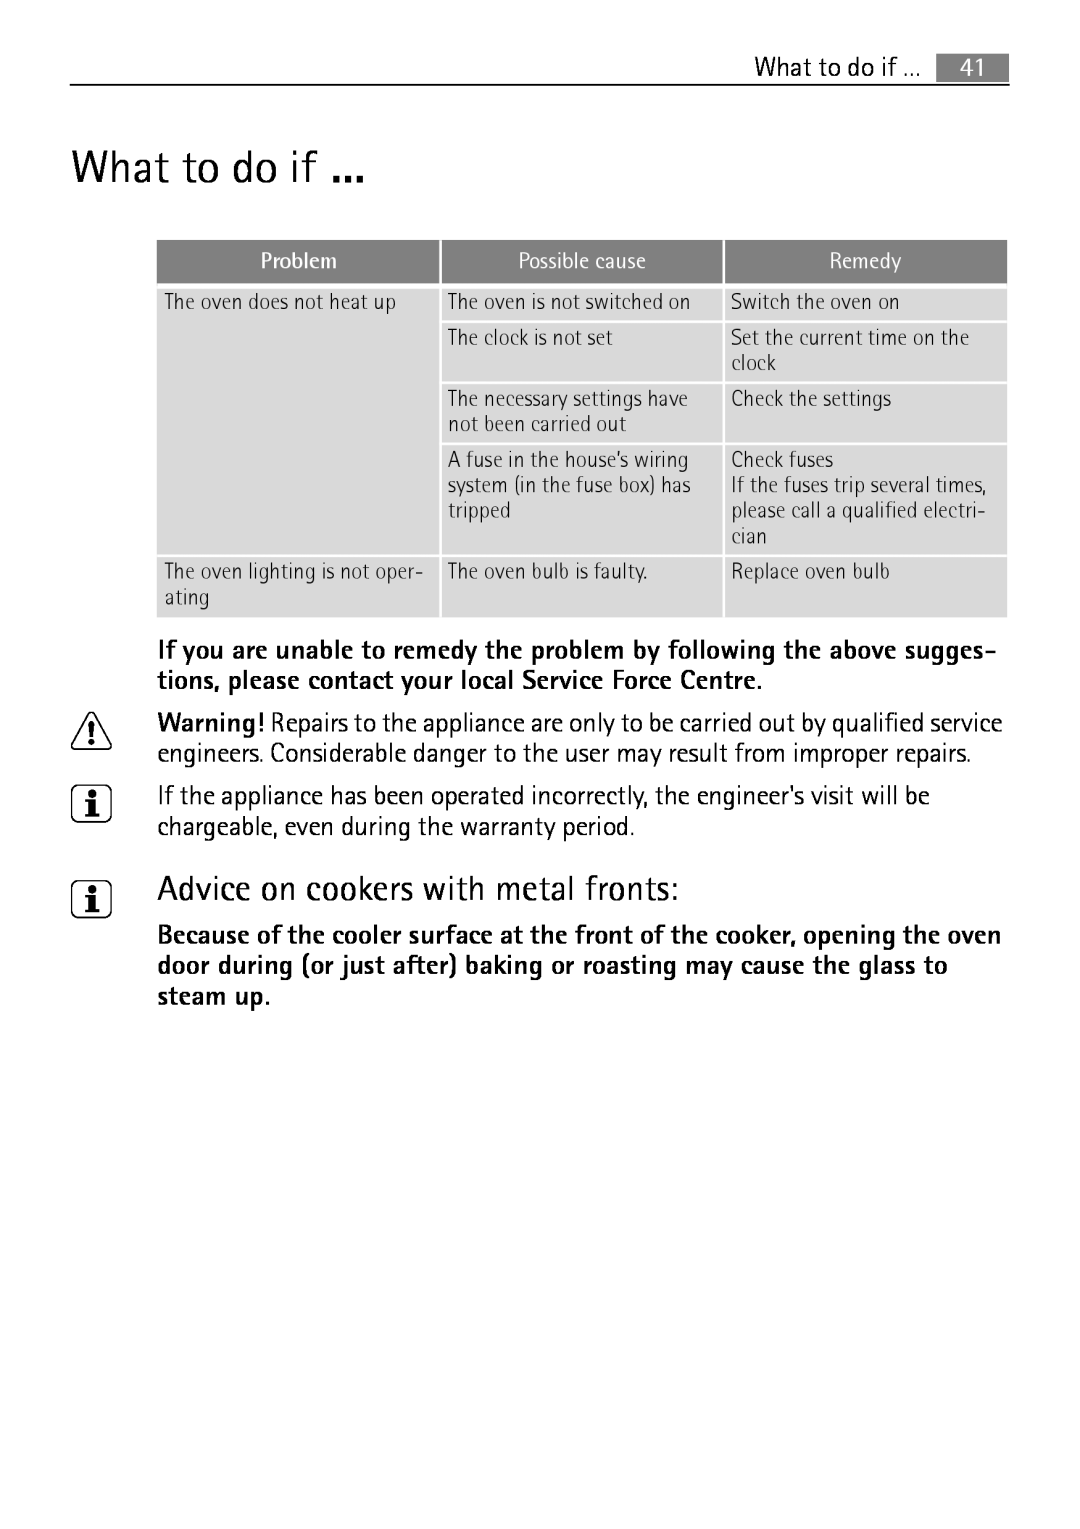 Electrolux B2100-5 user manual What to do if …, Advice on cookers with metal fronts, Problem, Possible cause, Remedy 